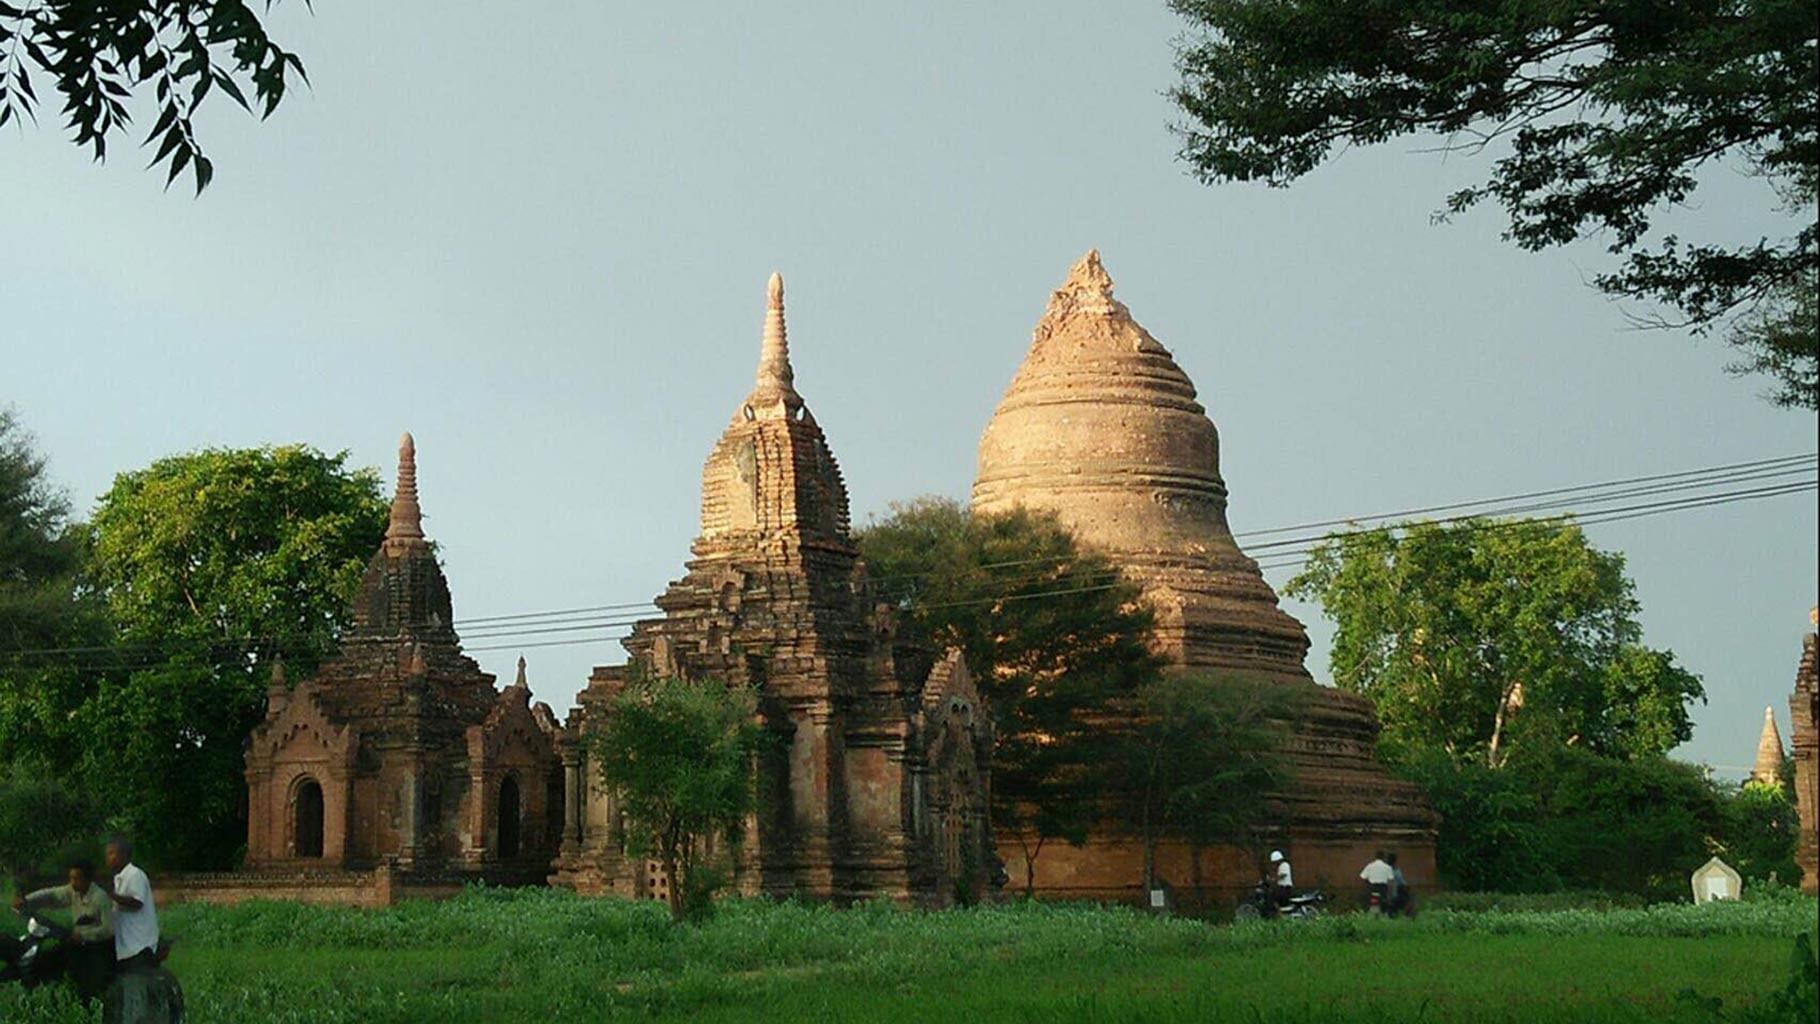 Photo of a damaged temple in Bagan, Myanmar, on Wednesday, 24 August 2016 provided by Soe Thura Lwin. (Photo: AP)